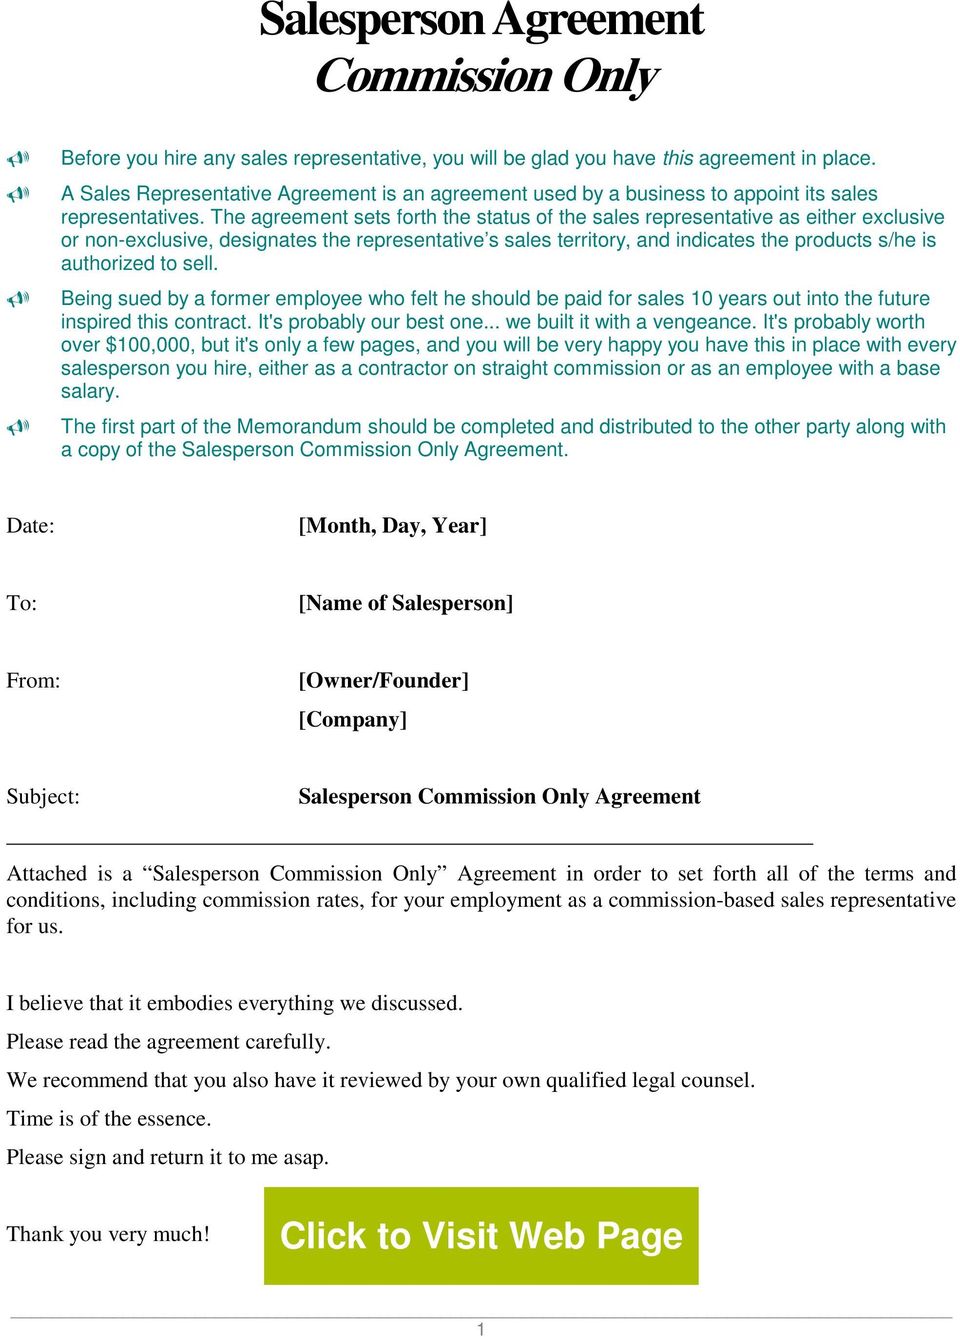 Salesperson Agreement Commission Only Pdf Free Download